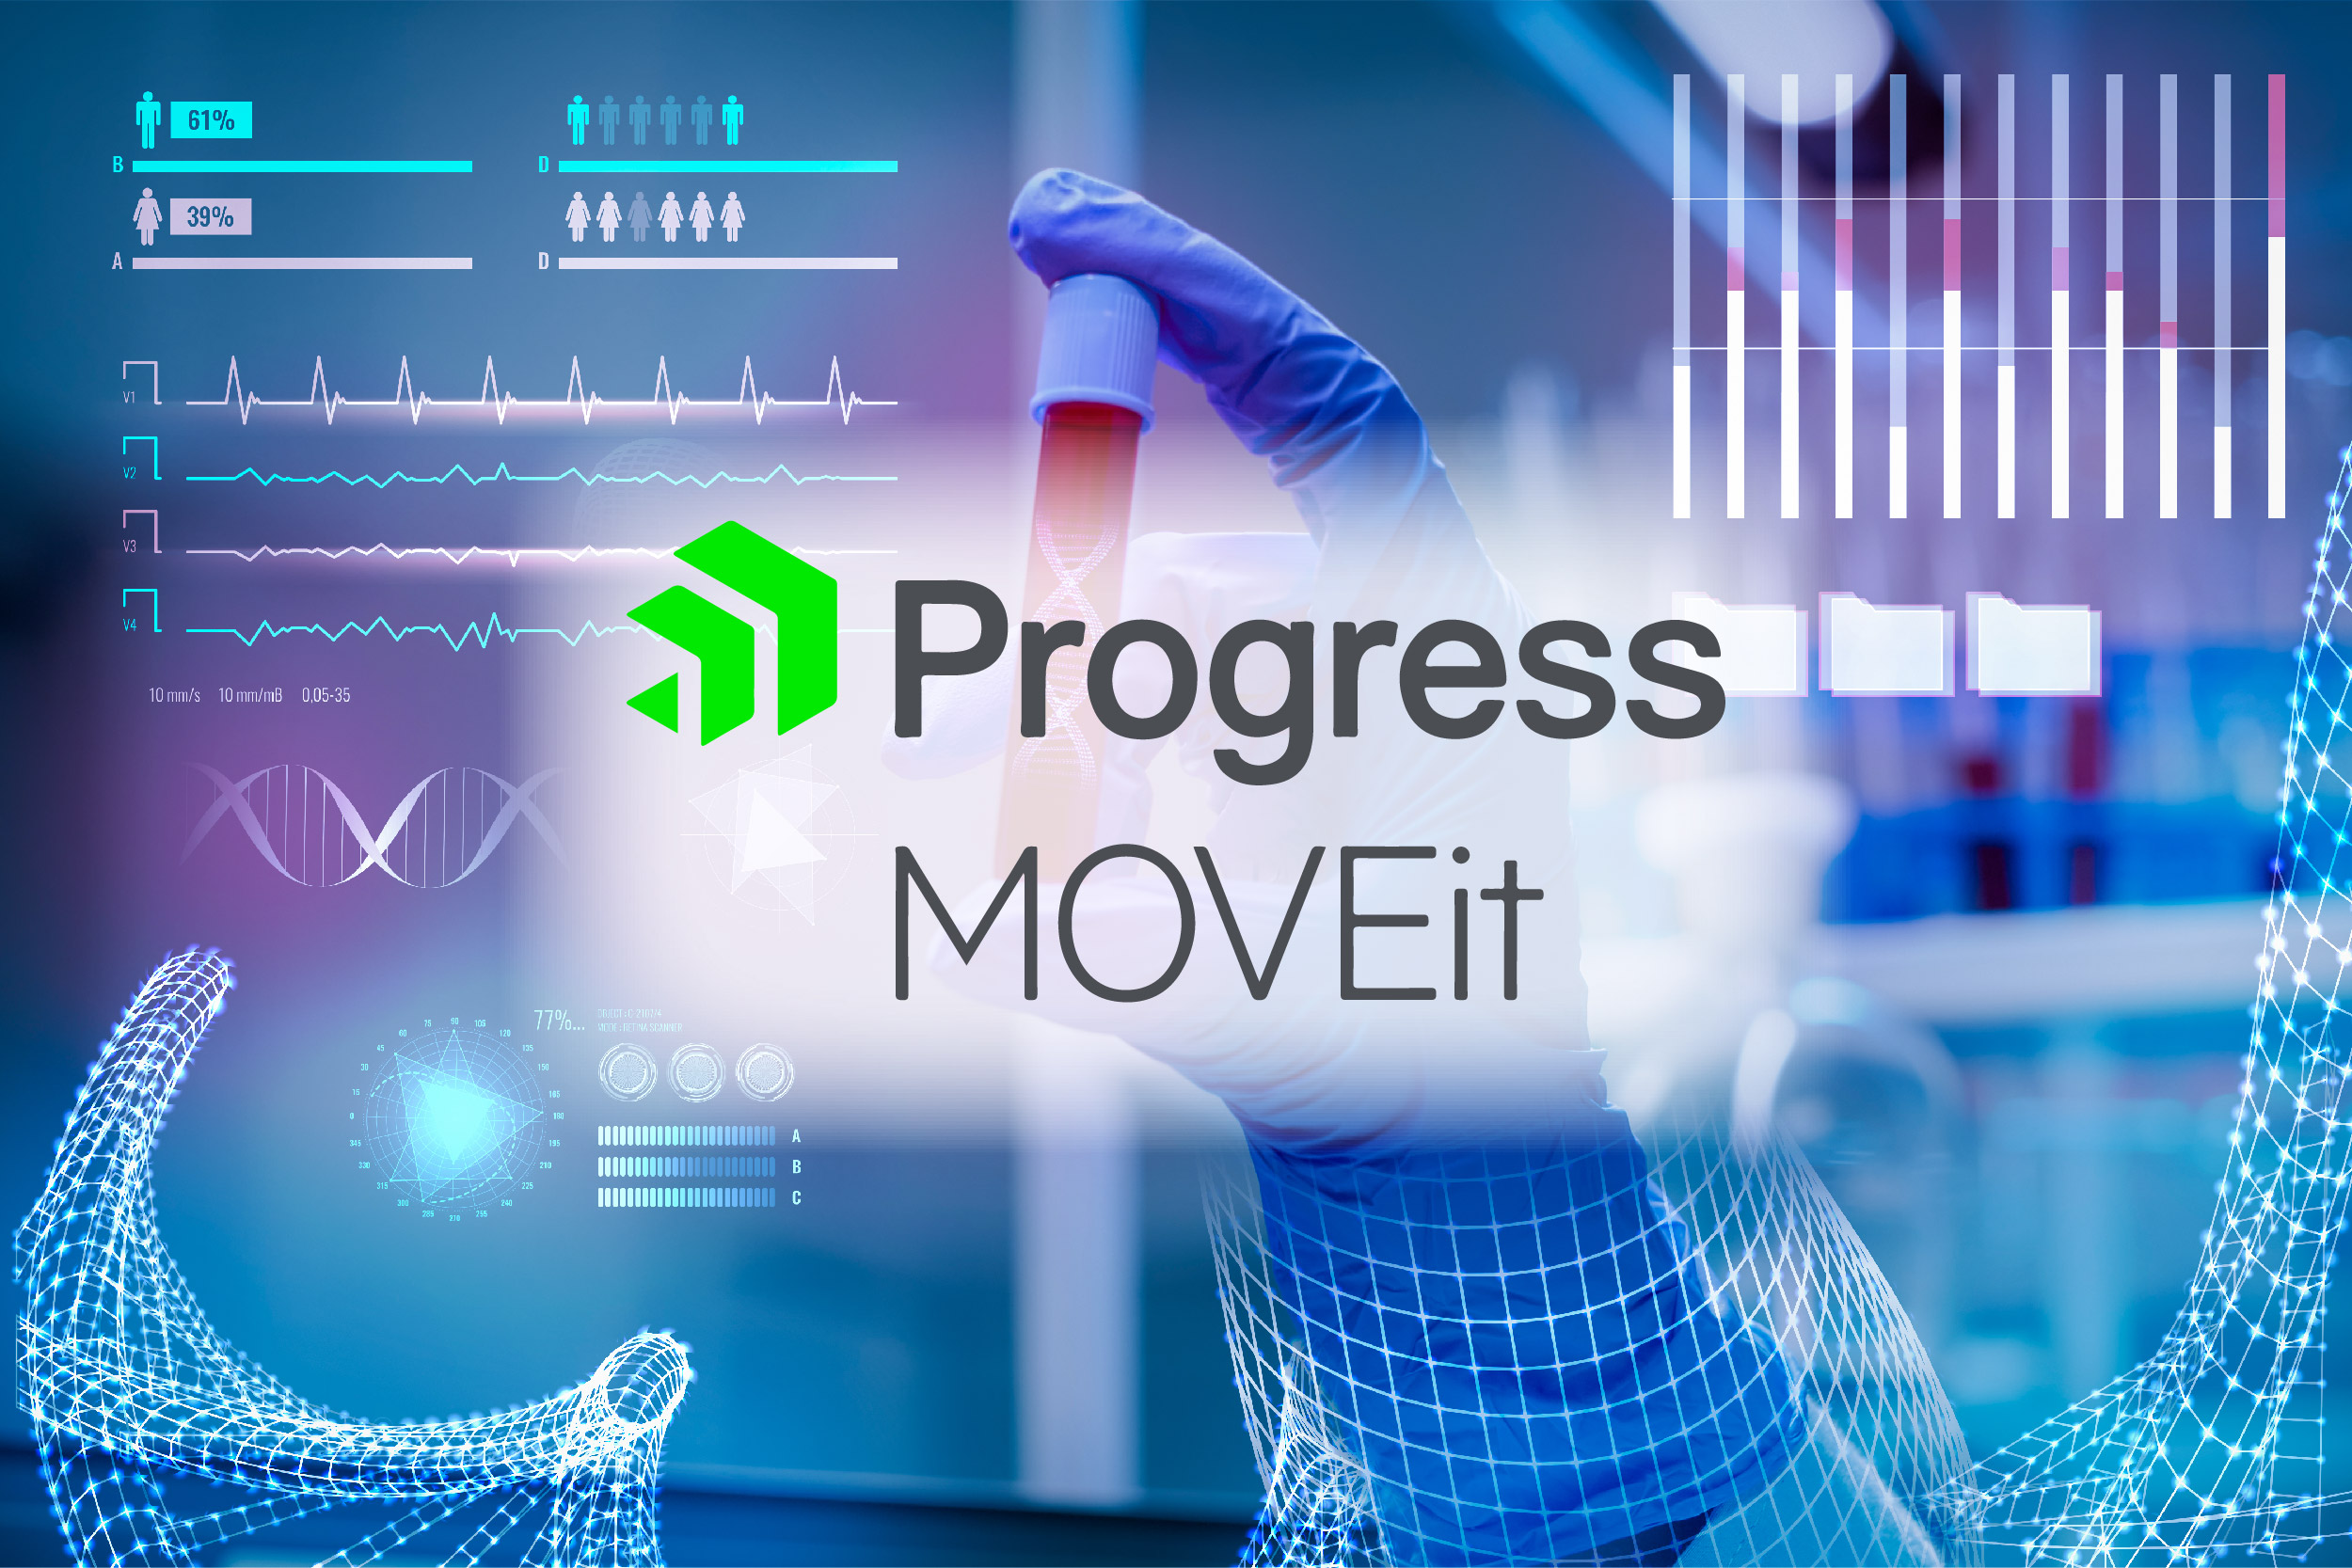 The Progress Moveet logo showcases a person with a test tube amidst the explosive alert of Colorado's 4 million victims experiencing massive data theft in the IBM MOVEit breach.